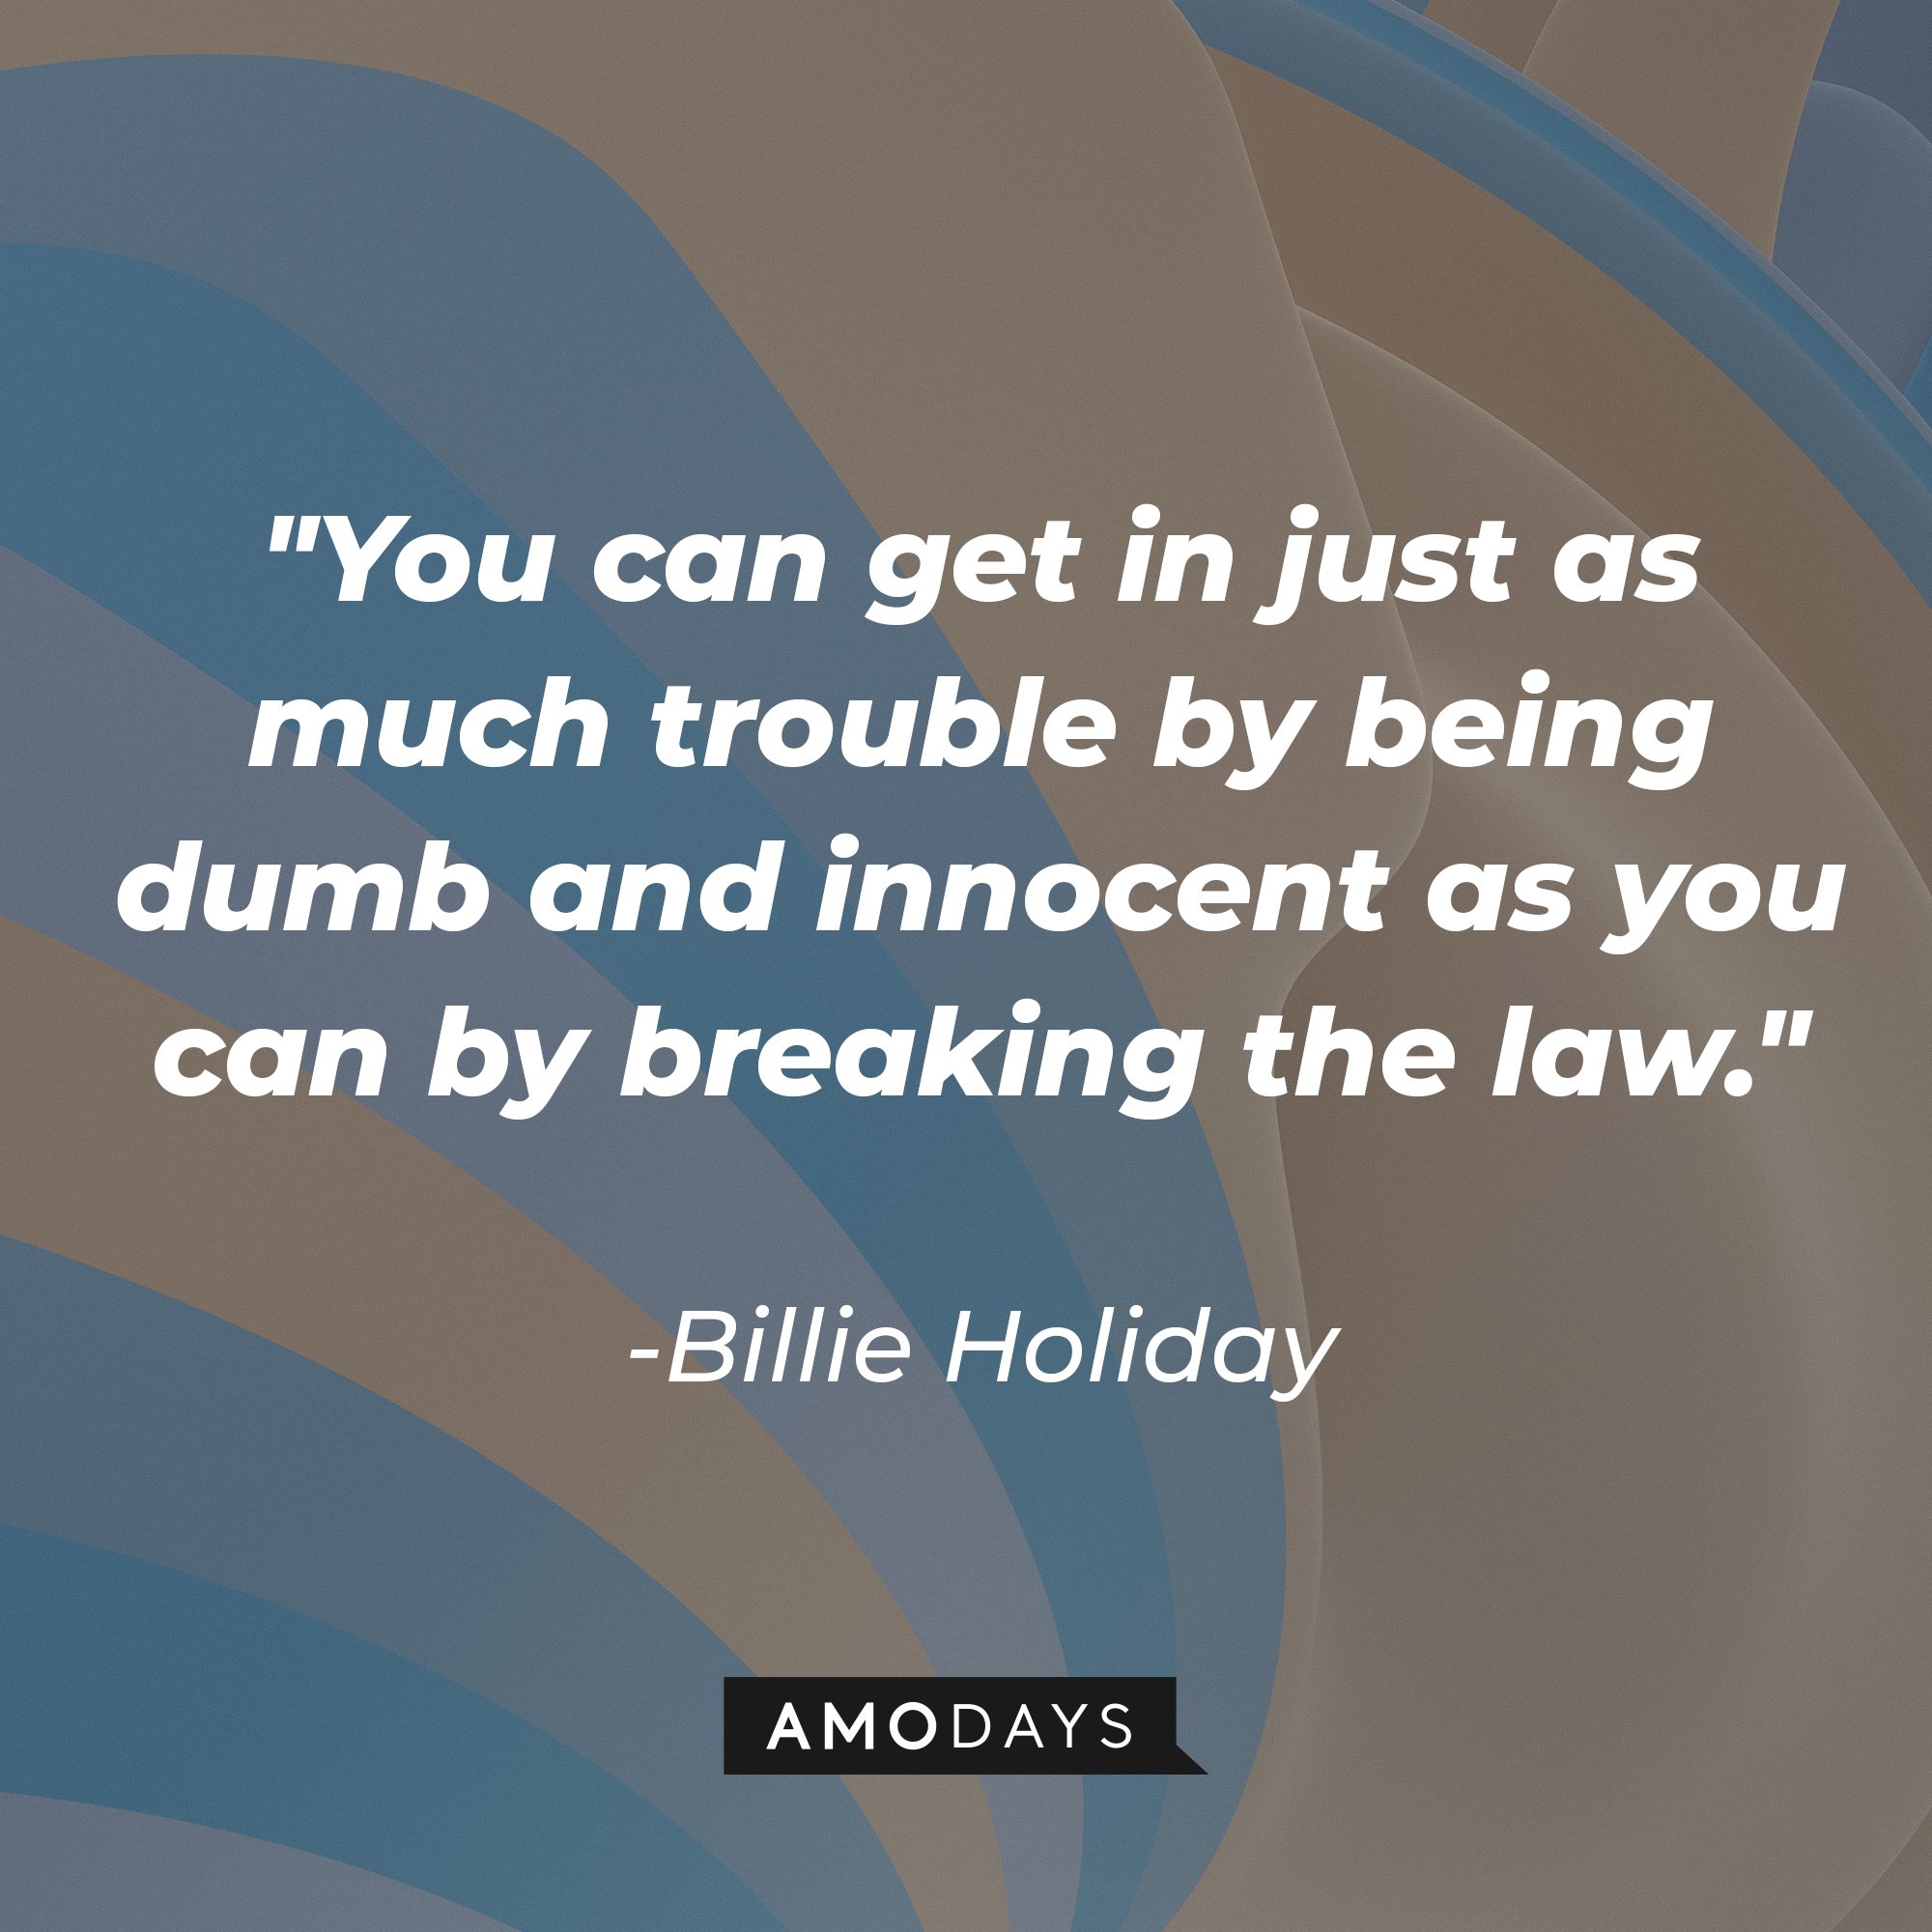 Billie Holiday's quote "You can get in just as much trouble by being dumb and innocent as you can by breaking the law." | Source: Unsplash.com